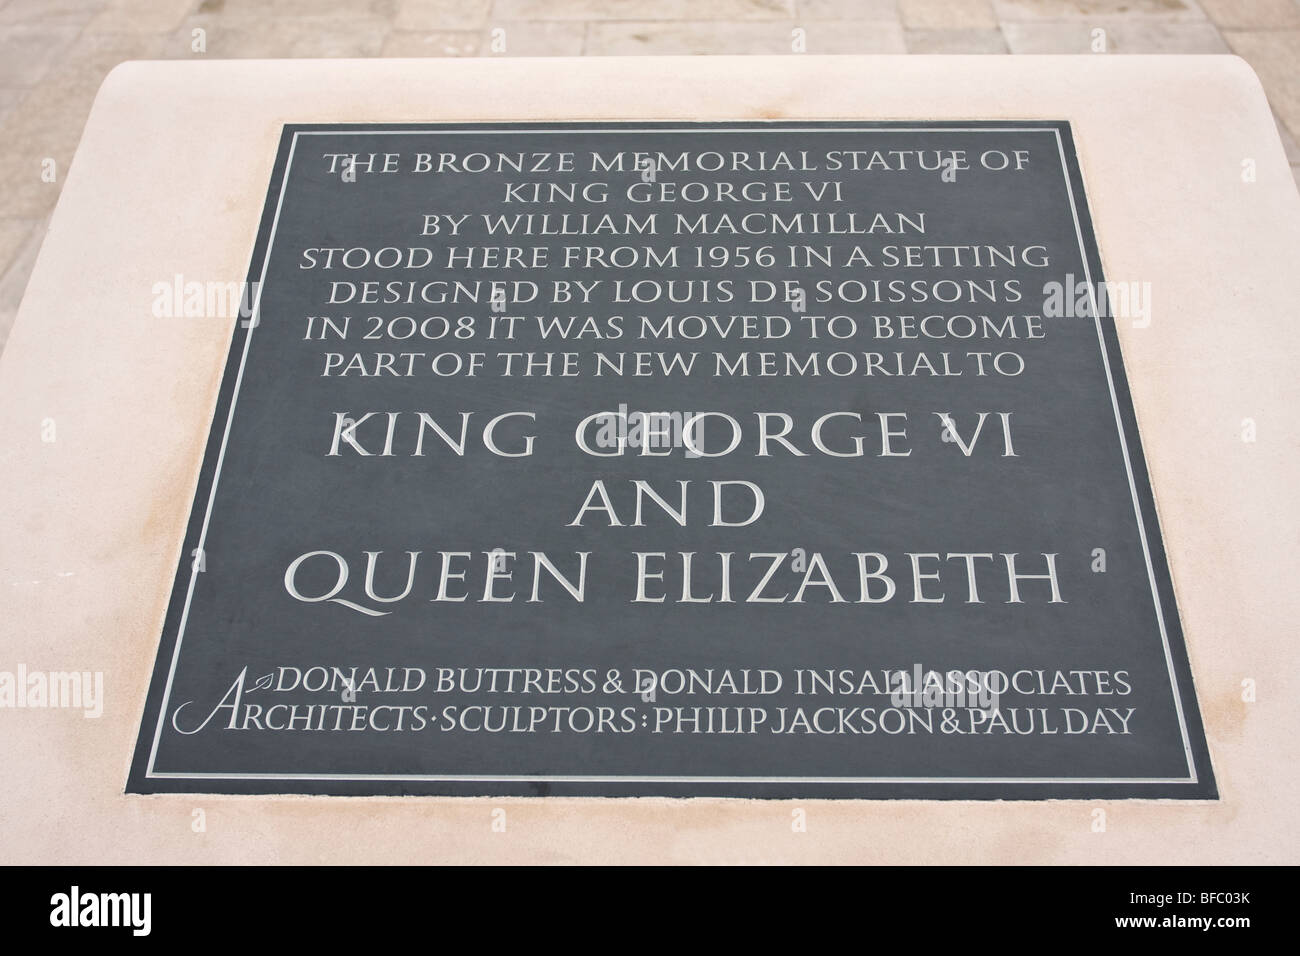 In Carlton Gardens, St James, just off Pall Mall is this informative plaque relating to King George VI and Queen Elizabeth. Stock Photo